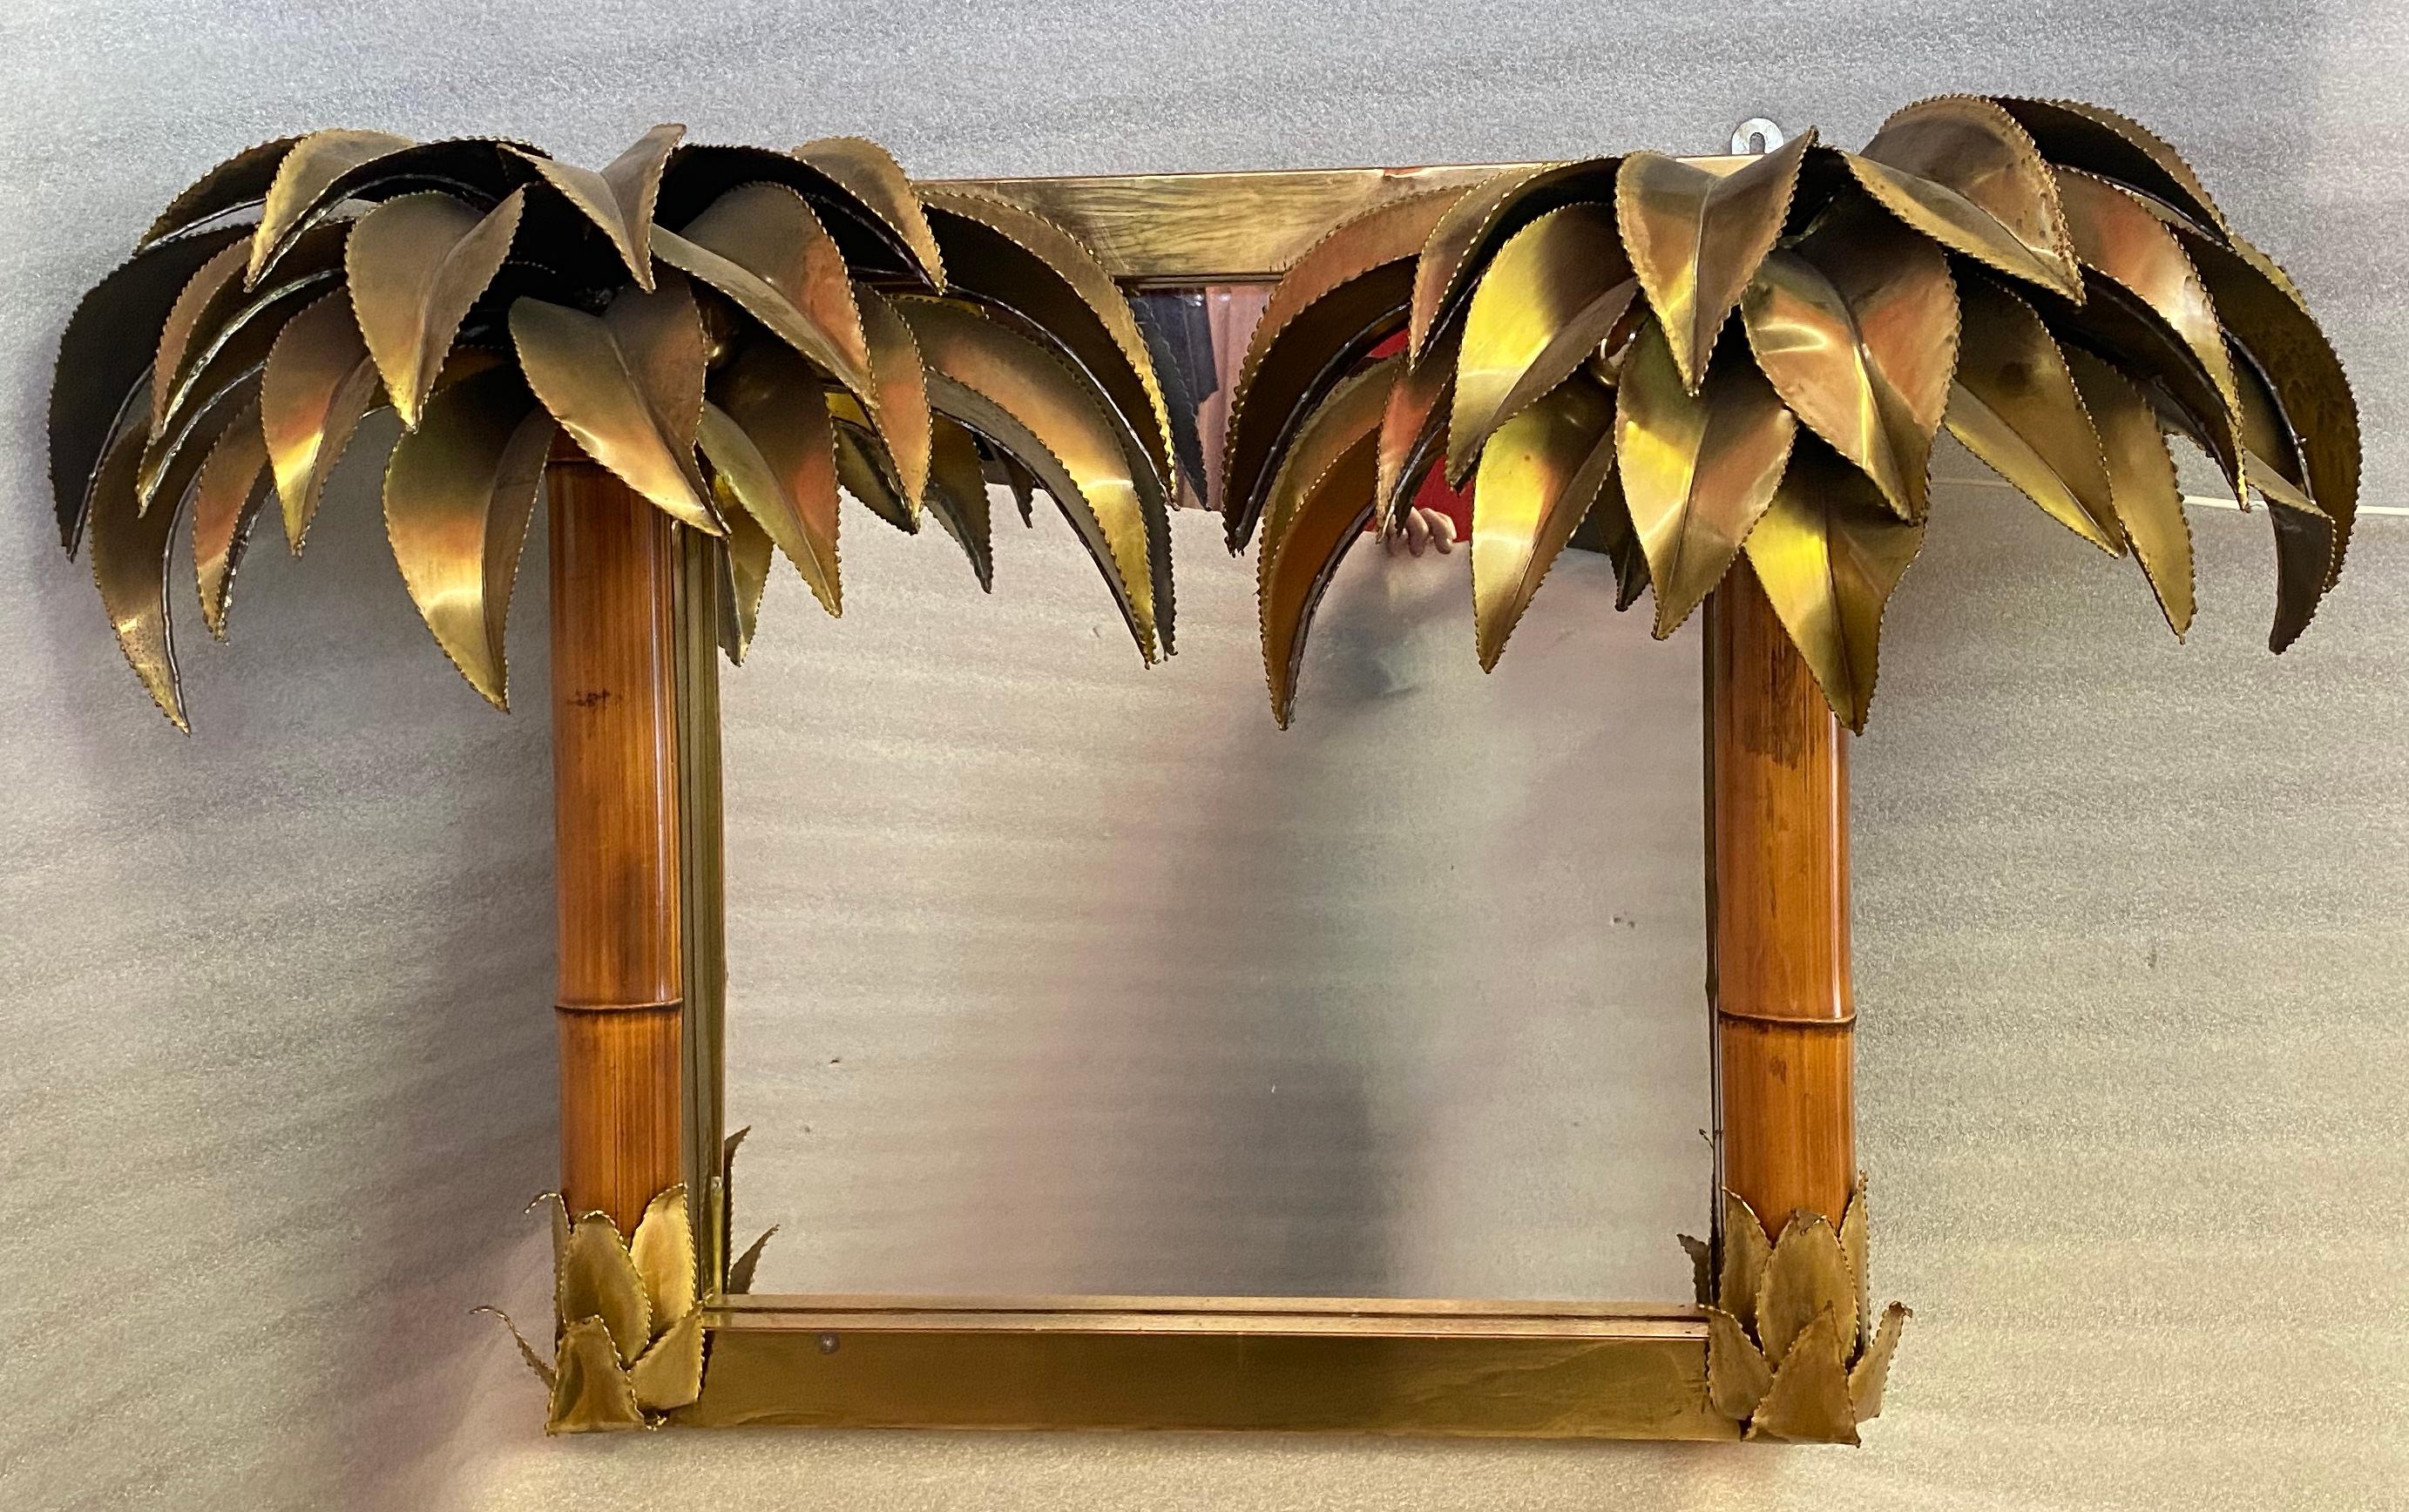 1970' Illuminating Palm and Bamboo Tree Mirror in Brass Unique and Original Piece By Barbier, Jansen, Fernandez, Faure, 120 x 29 x H 65 cm 
Mirror in gilded brass and bamboo, adorned with 2 illuminating palm trees French work of Barbier, supplier